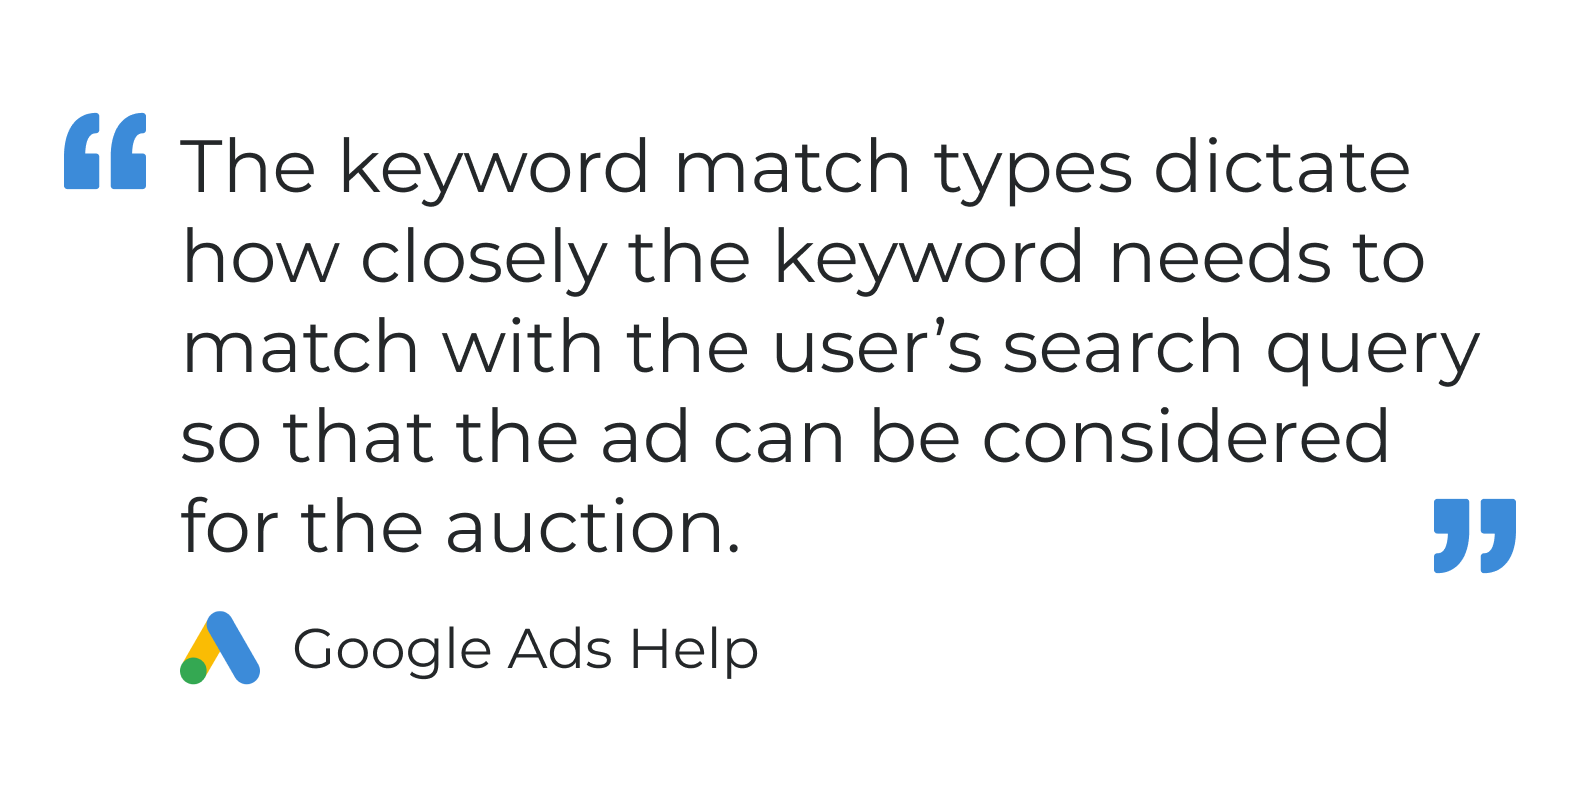 What are keyword match types